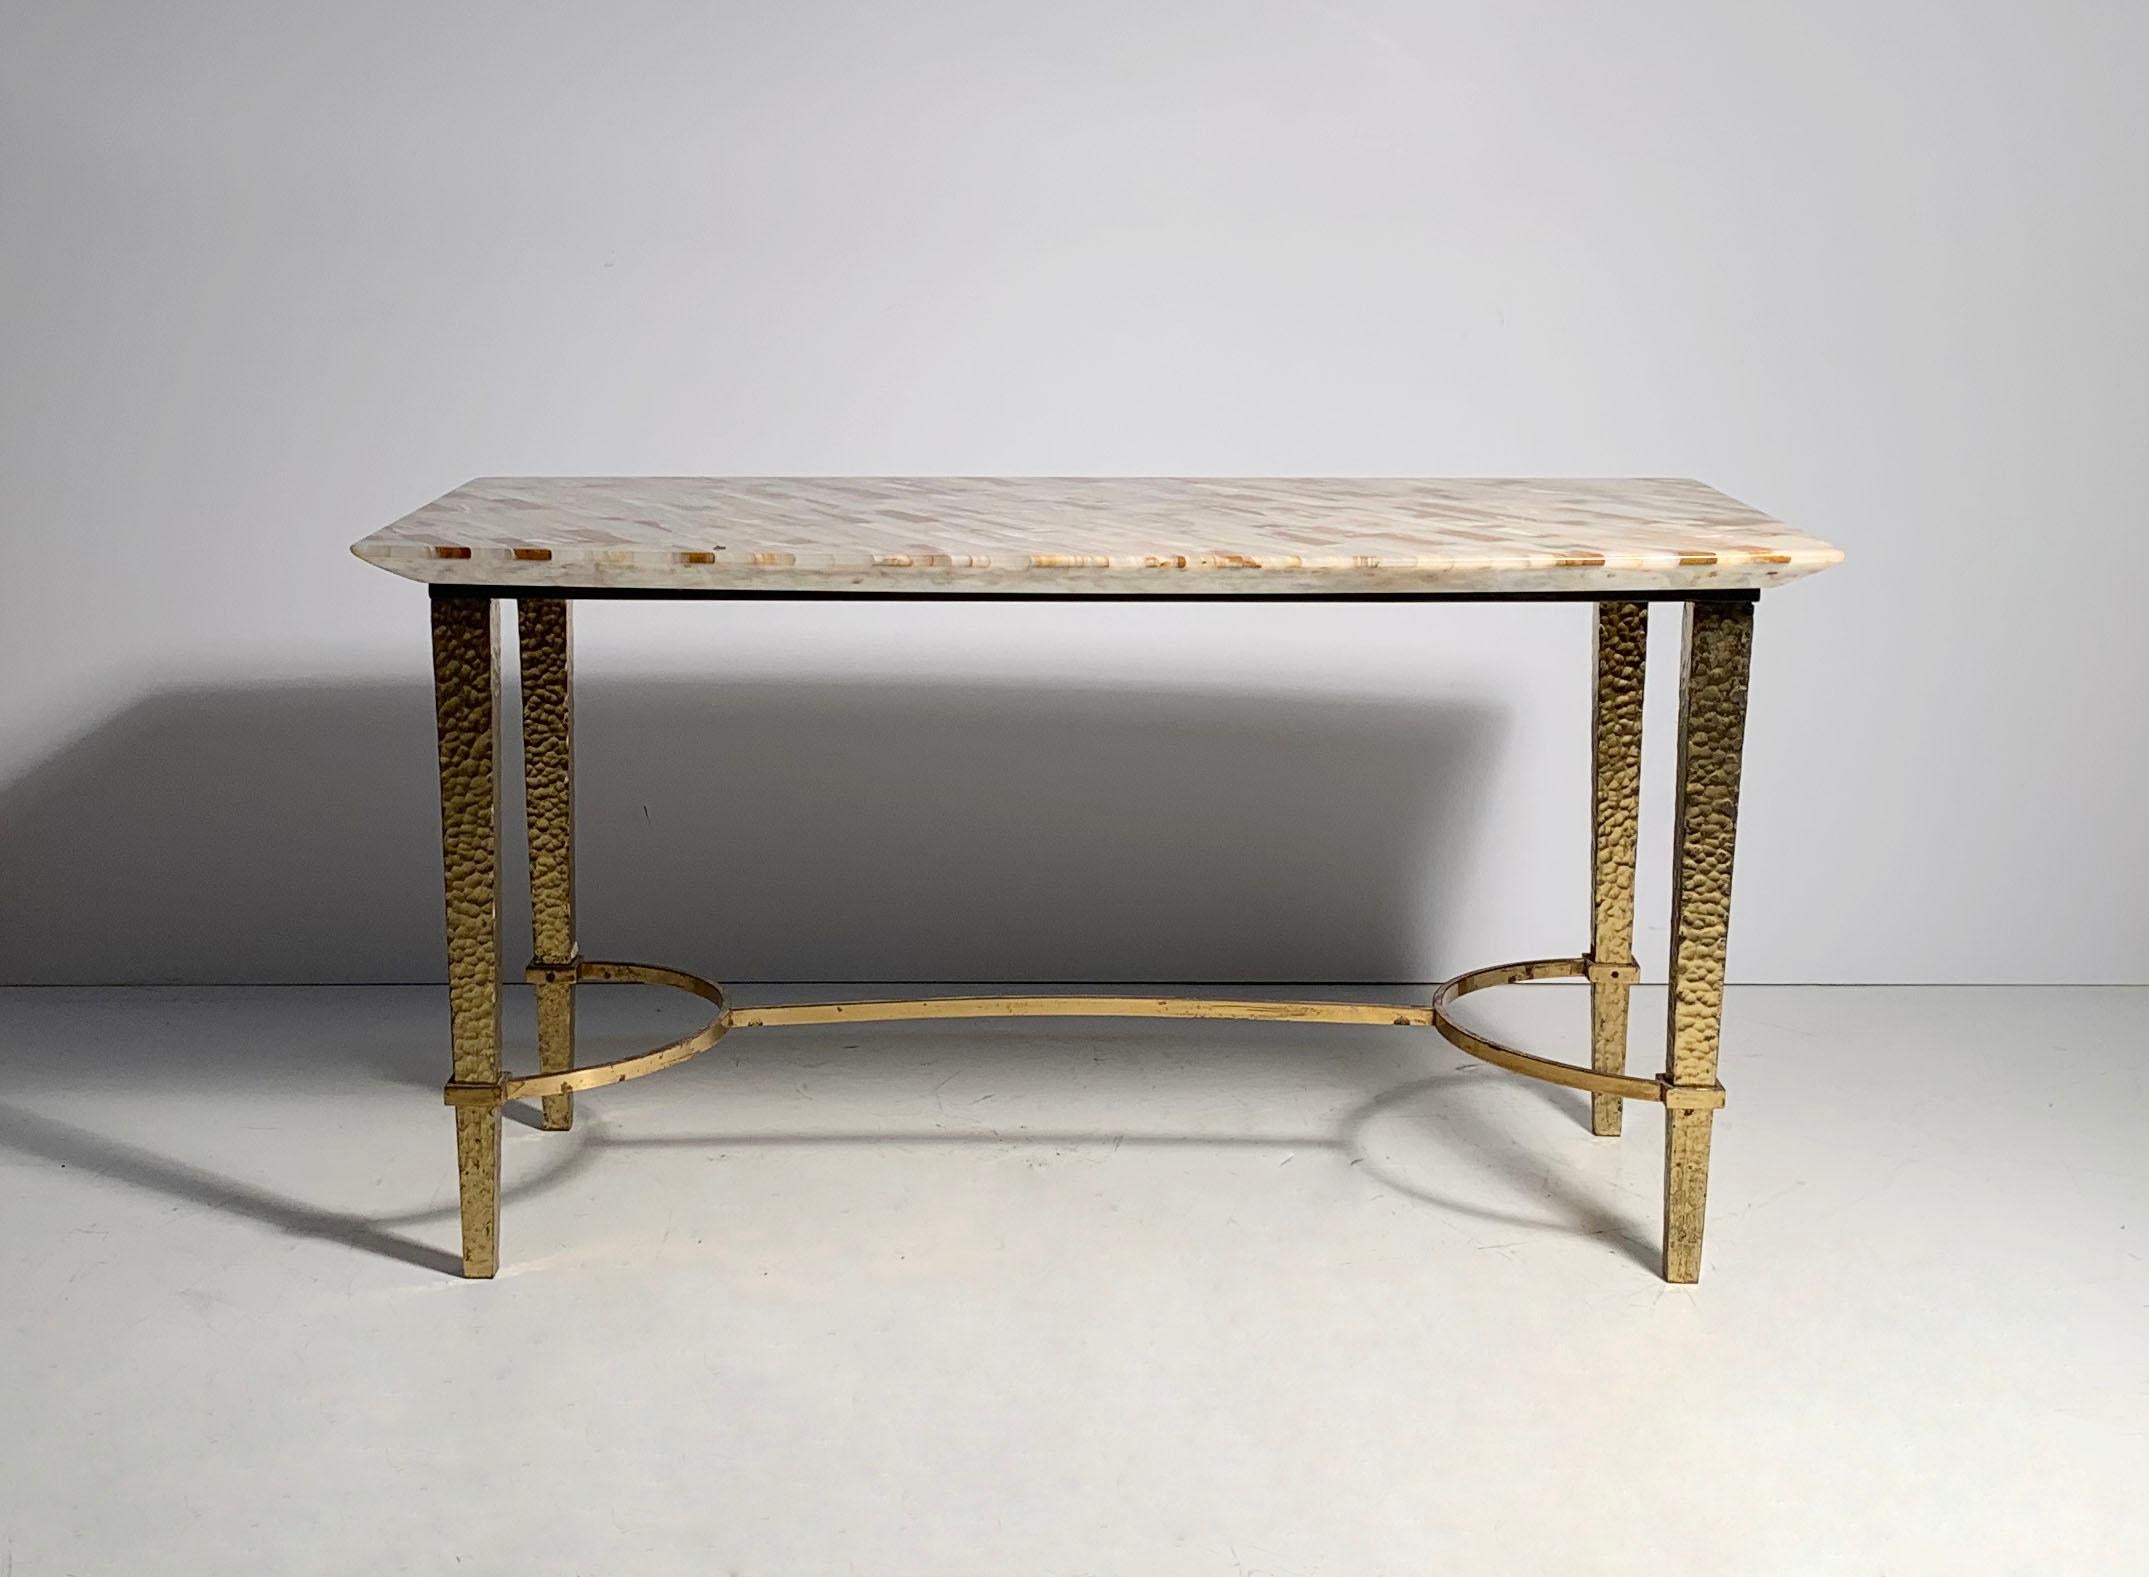 Vintage Gilt / Gilded Hammered Metal Petite Coffee Table with Stone Top In Good Condition For Sale In Chicago, IL